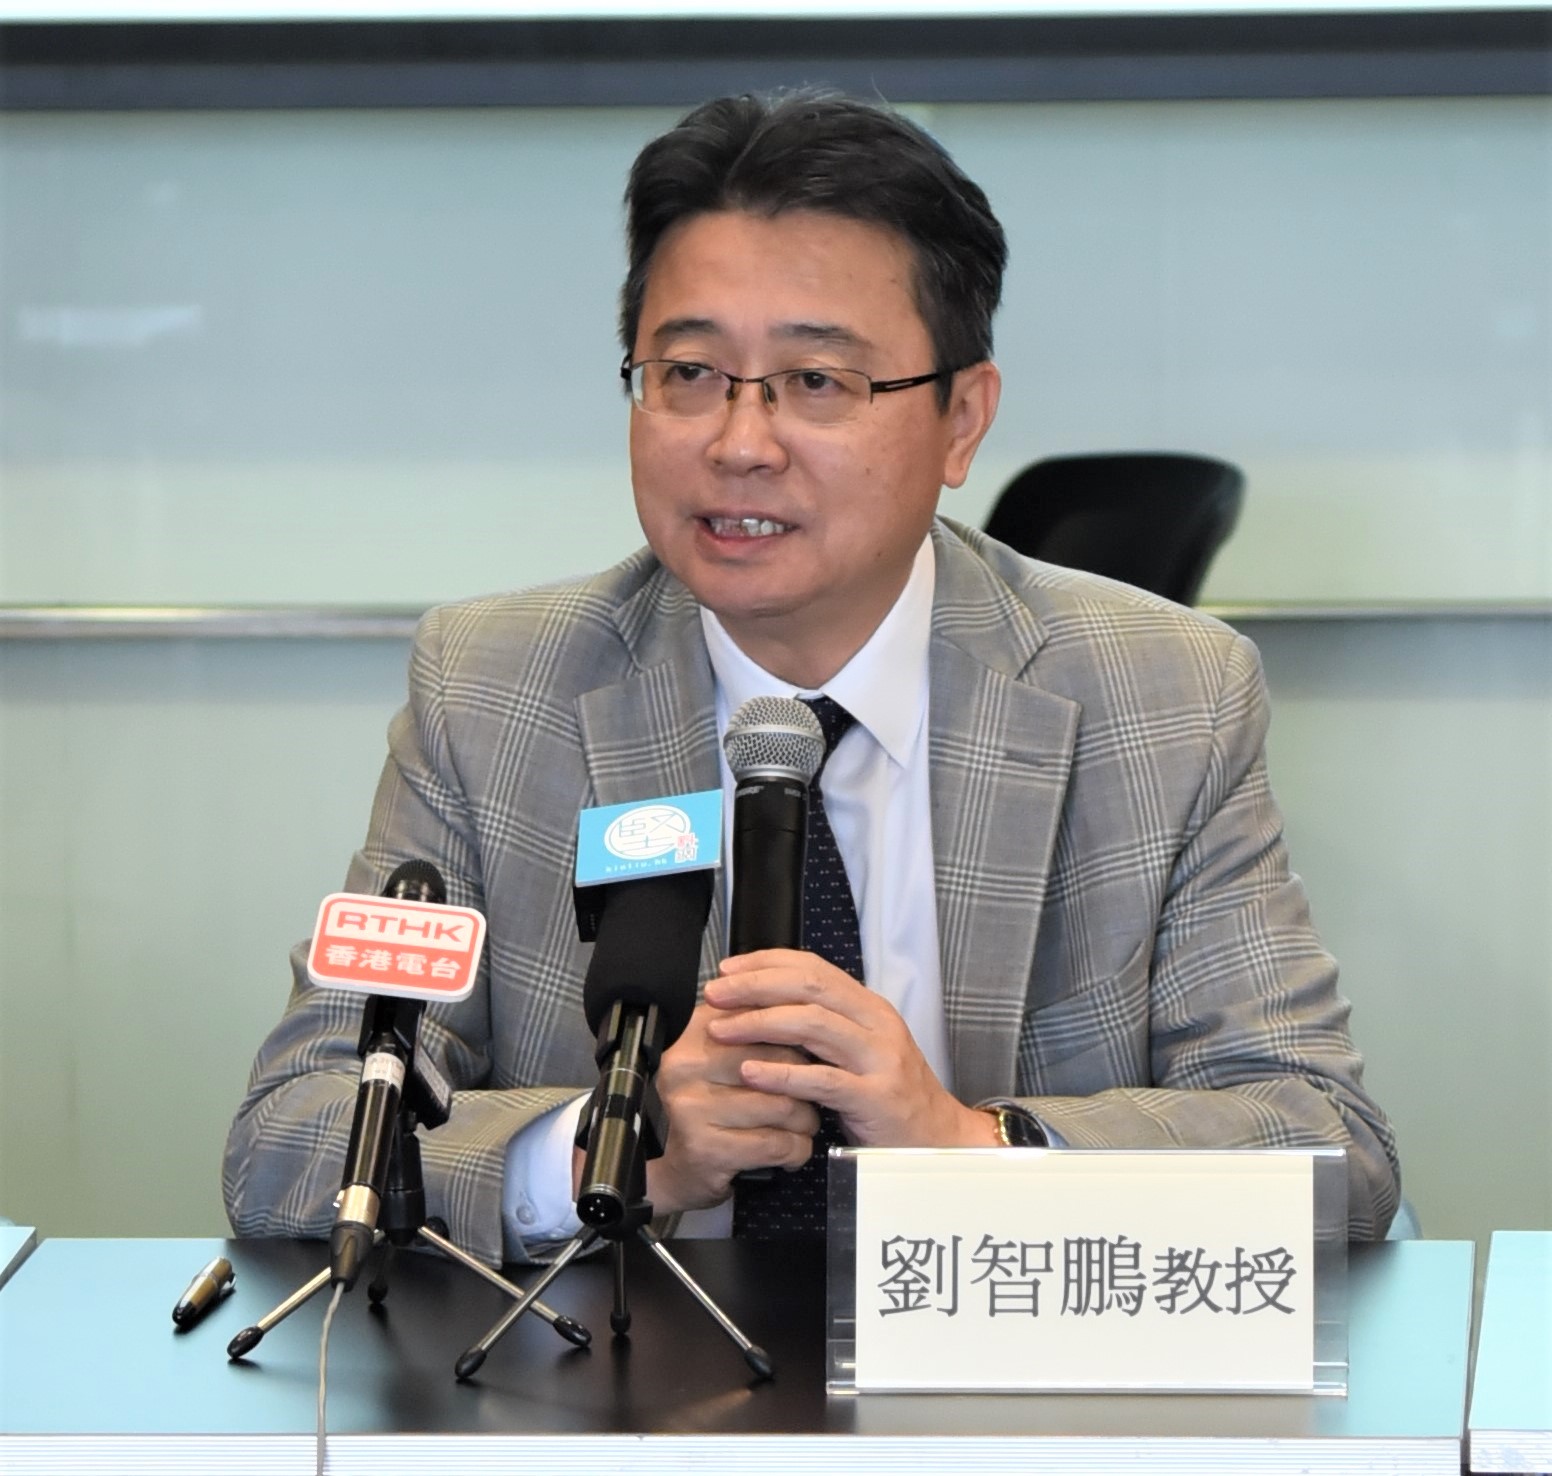 Professor Lau Chi-pang, Hong Kong member of the Chinese People's Political Consultative Conference (CPPCC), Associate Vice President (Academic Affairs and External Relations) of Lingnan University,  Member of Legislative Council